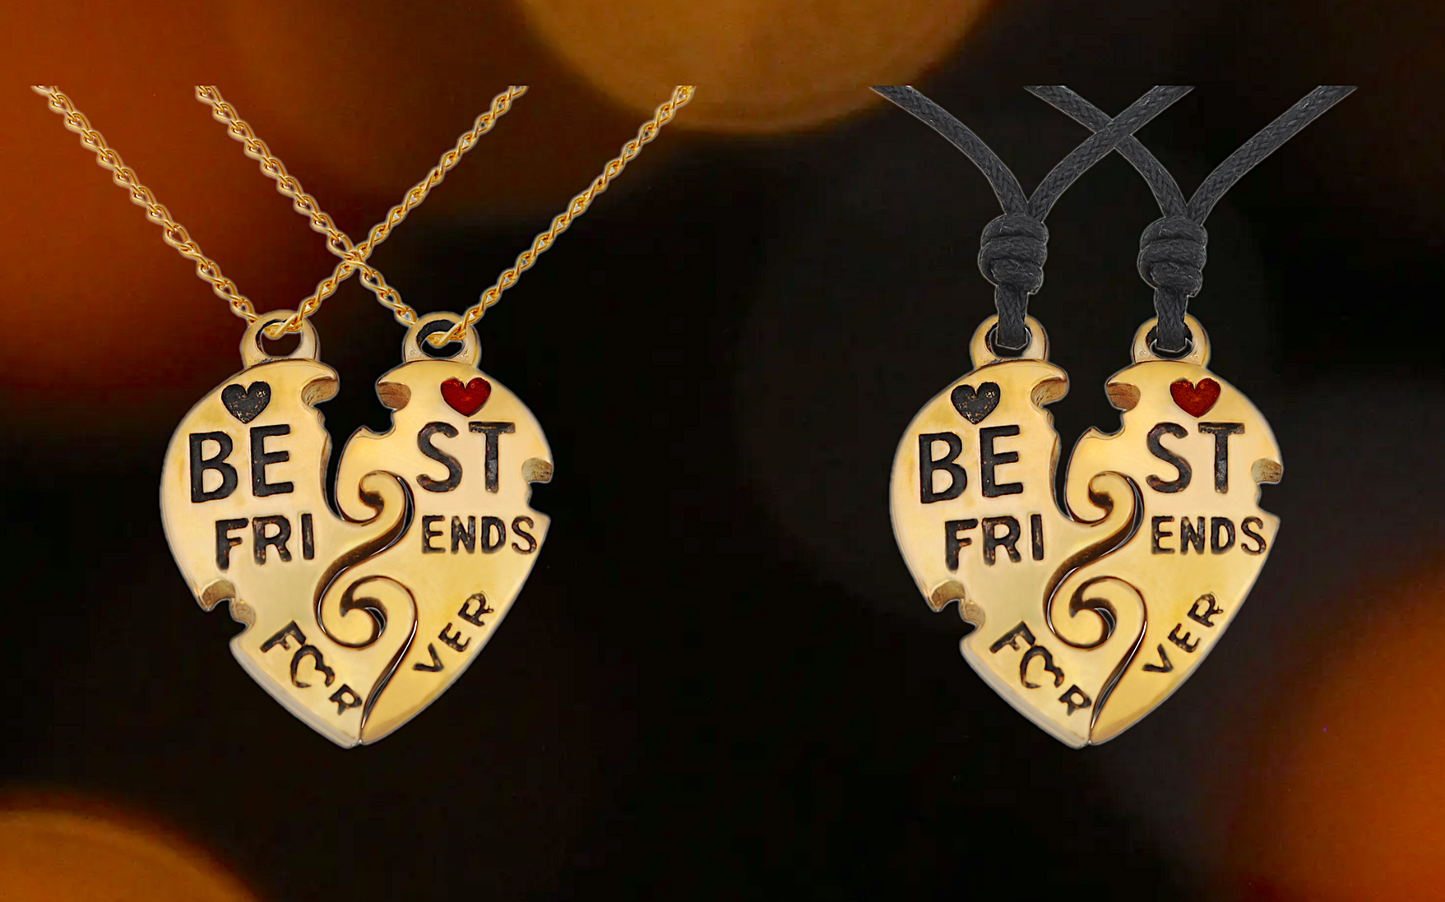 Best Friends Ying Yang Silver Pewter Gold Brass Charm Necklace Pendant Jewelry